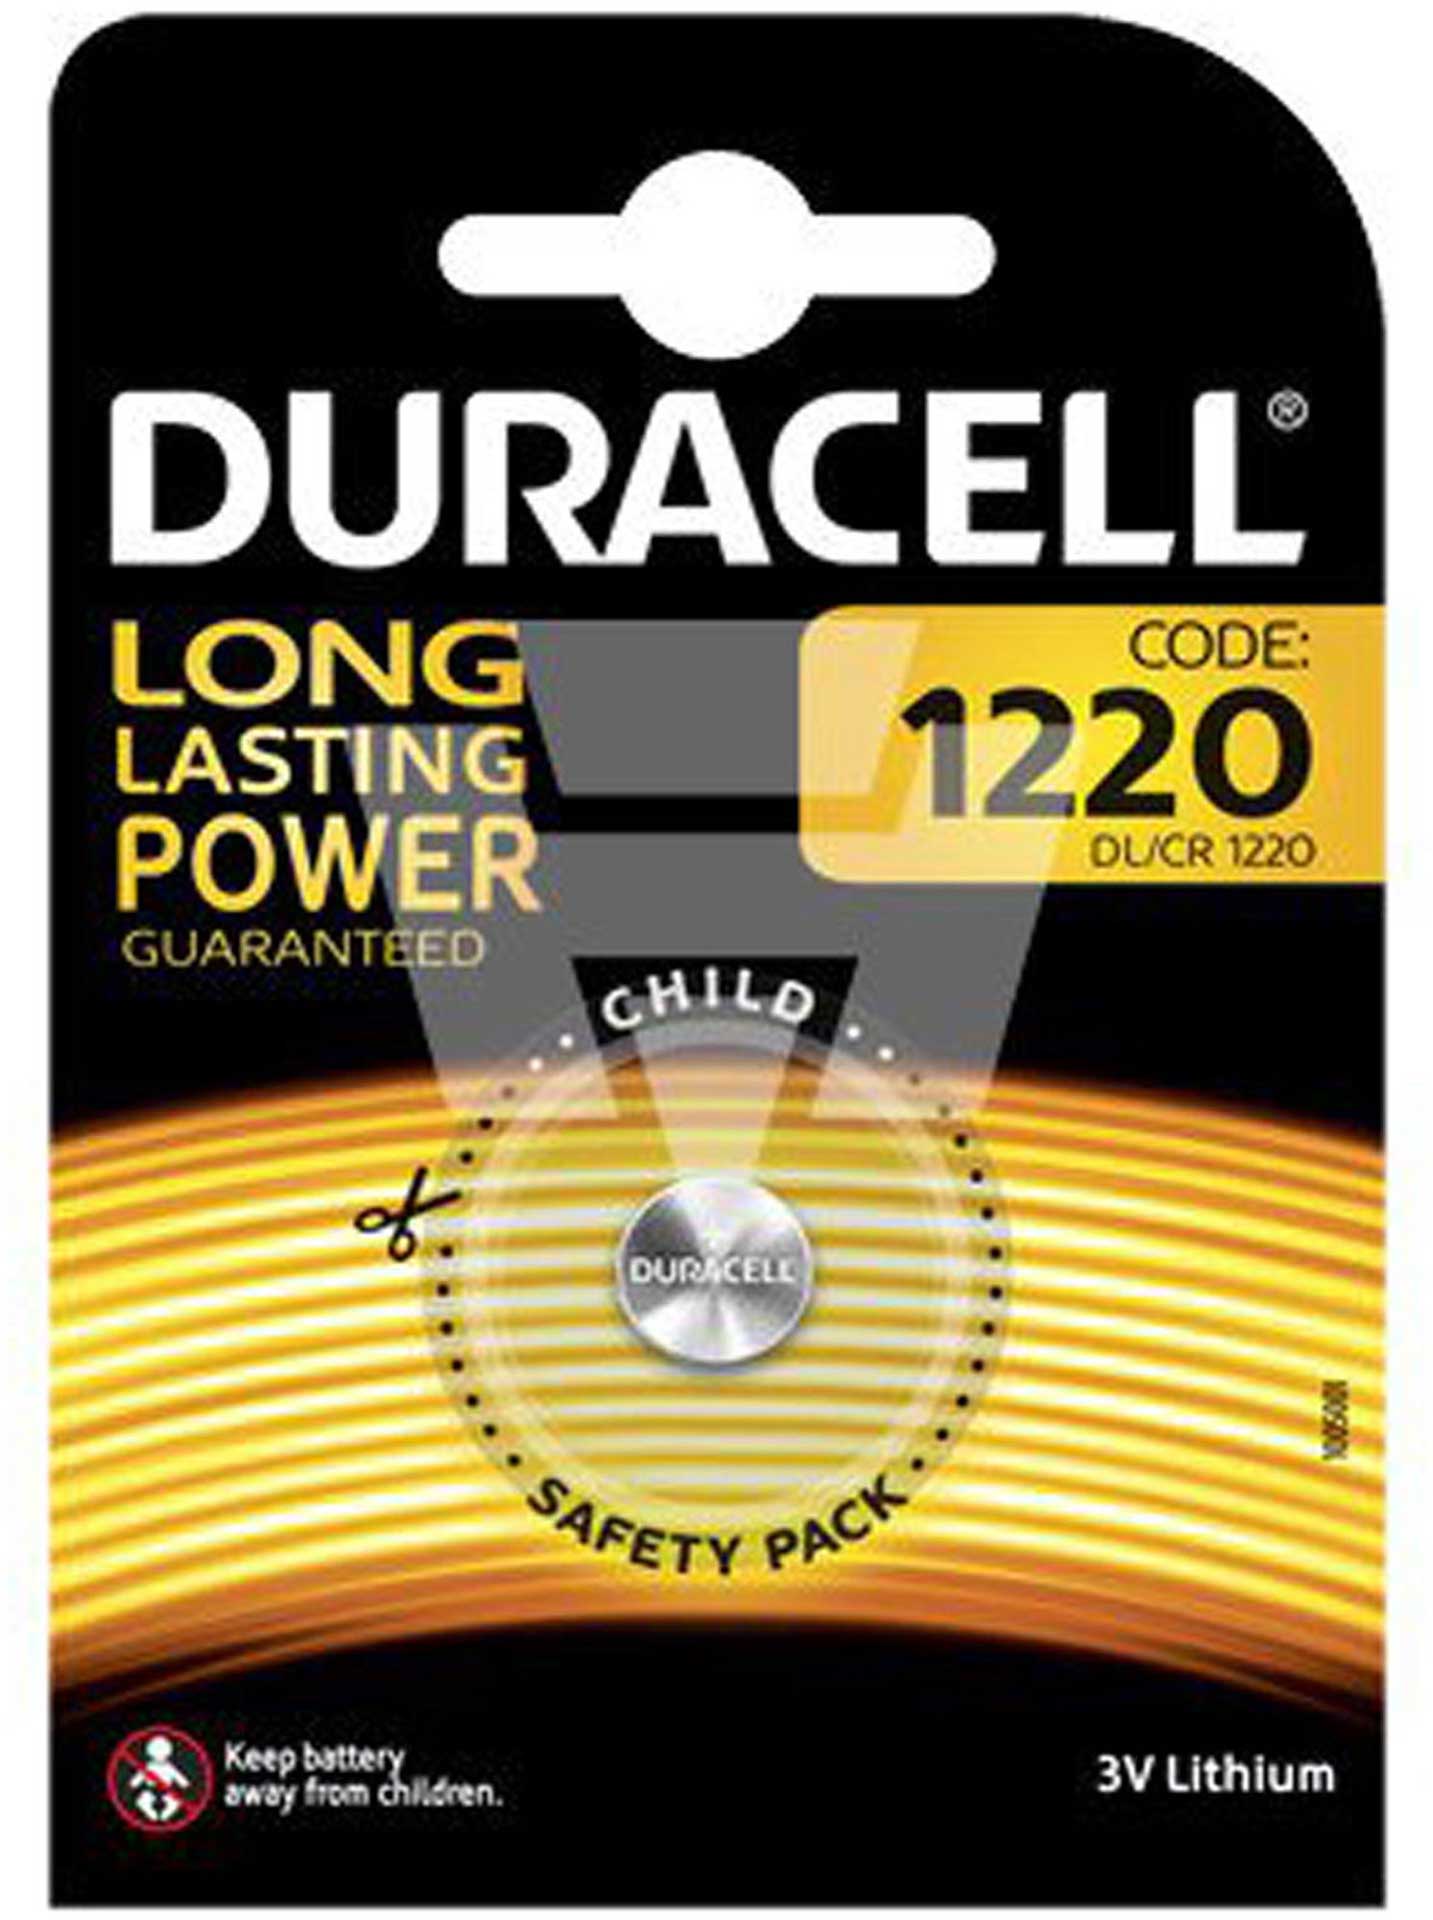 DURACELL LITHIUM BUTTON CELL BATTERY CR1220 EP 3 V 1PCS 35MAH LITHIUM